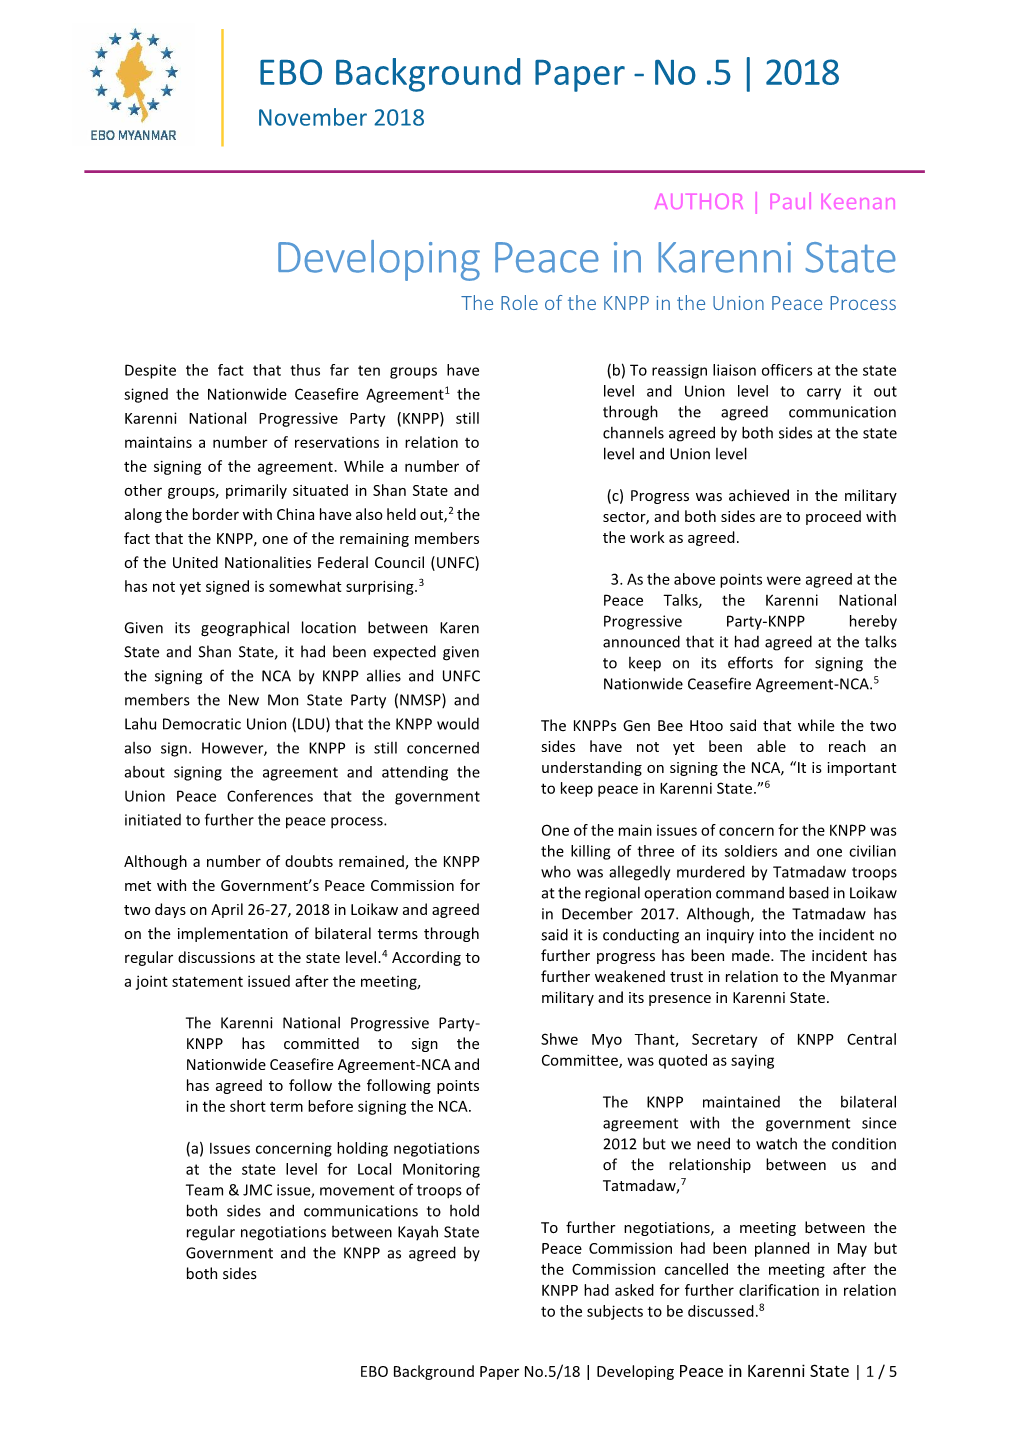 Developing Peace in Karenni State the Role of the KNPP in the Union Peace Process